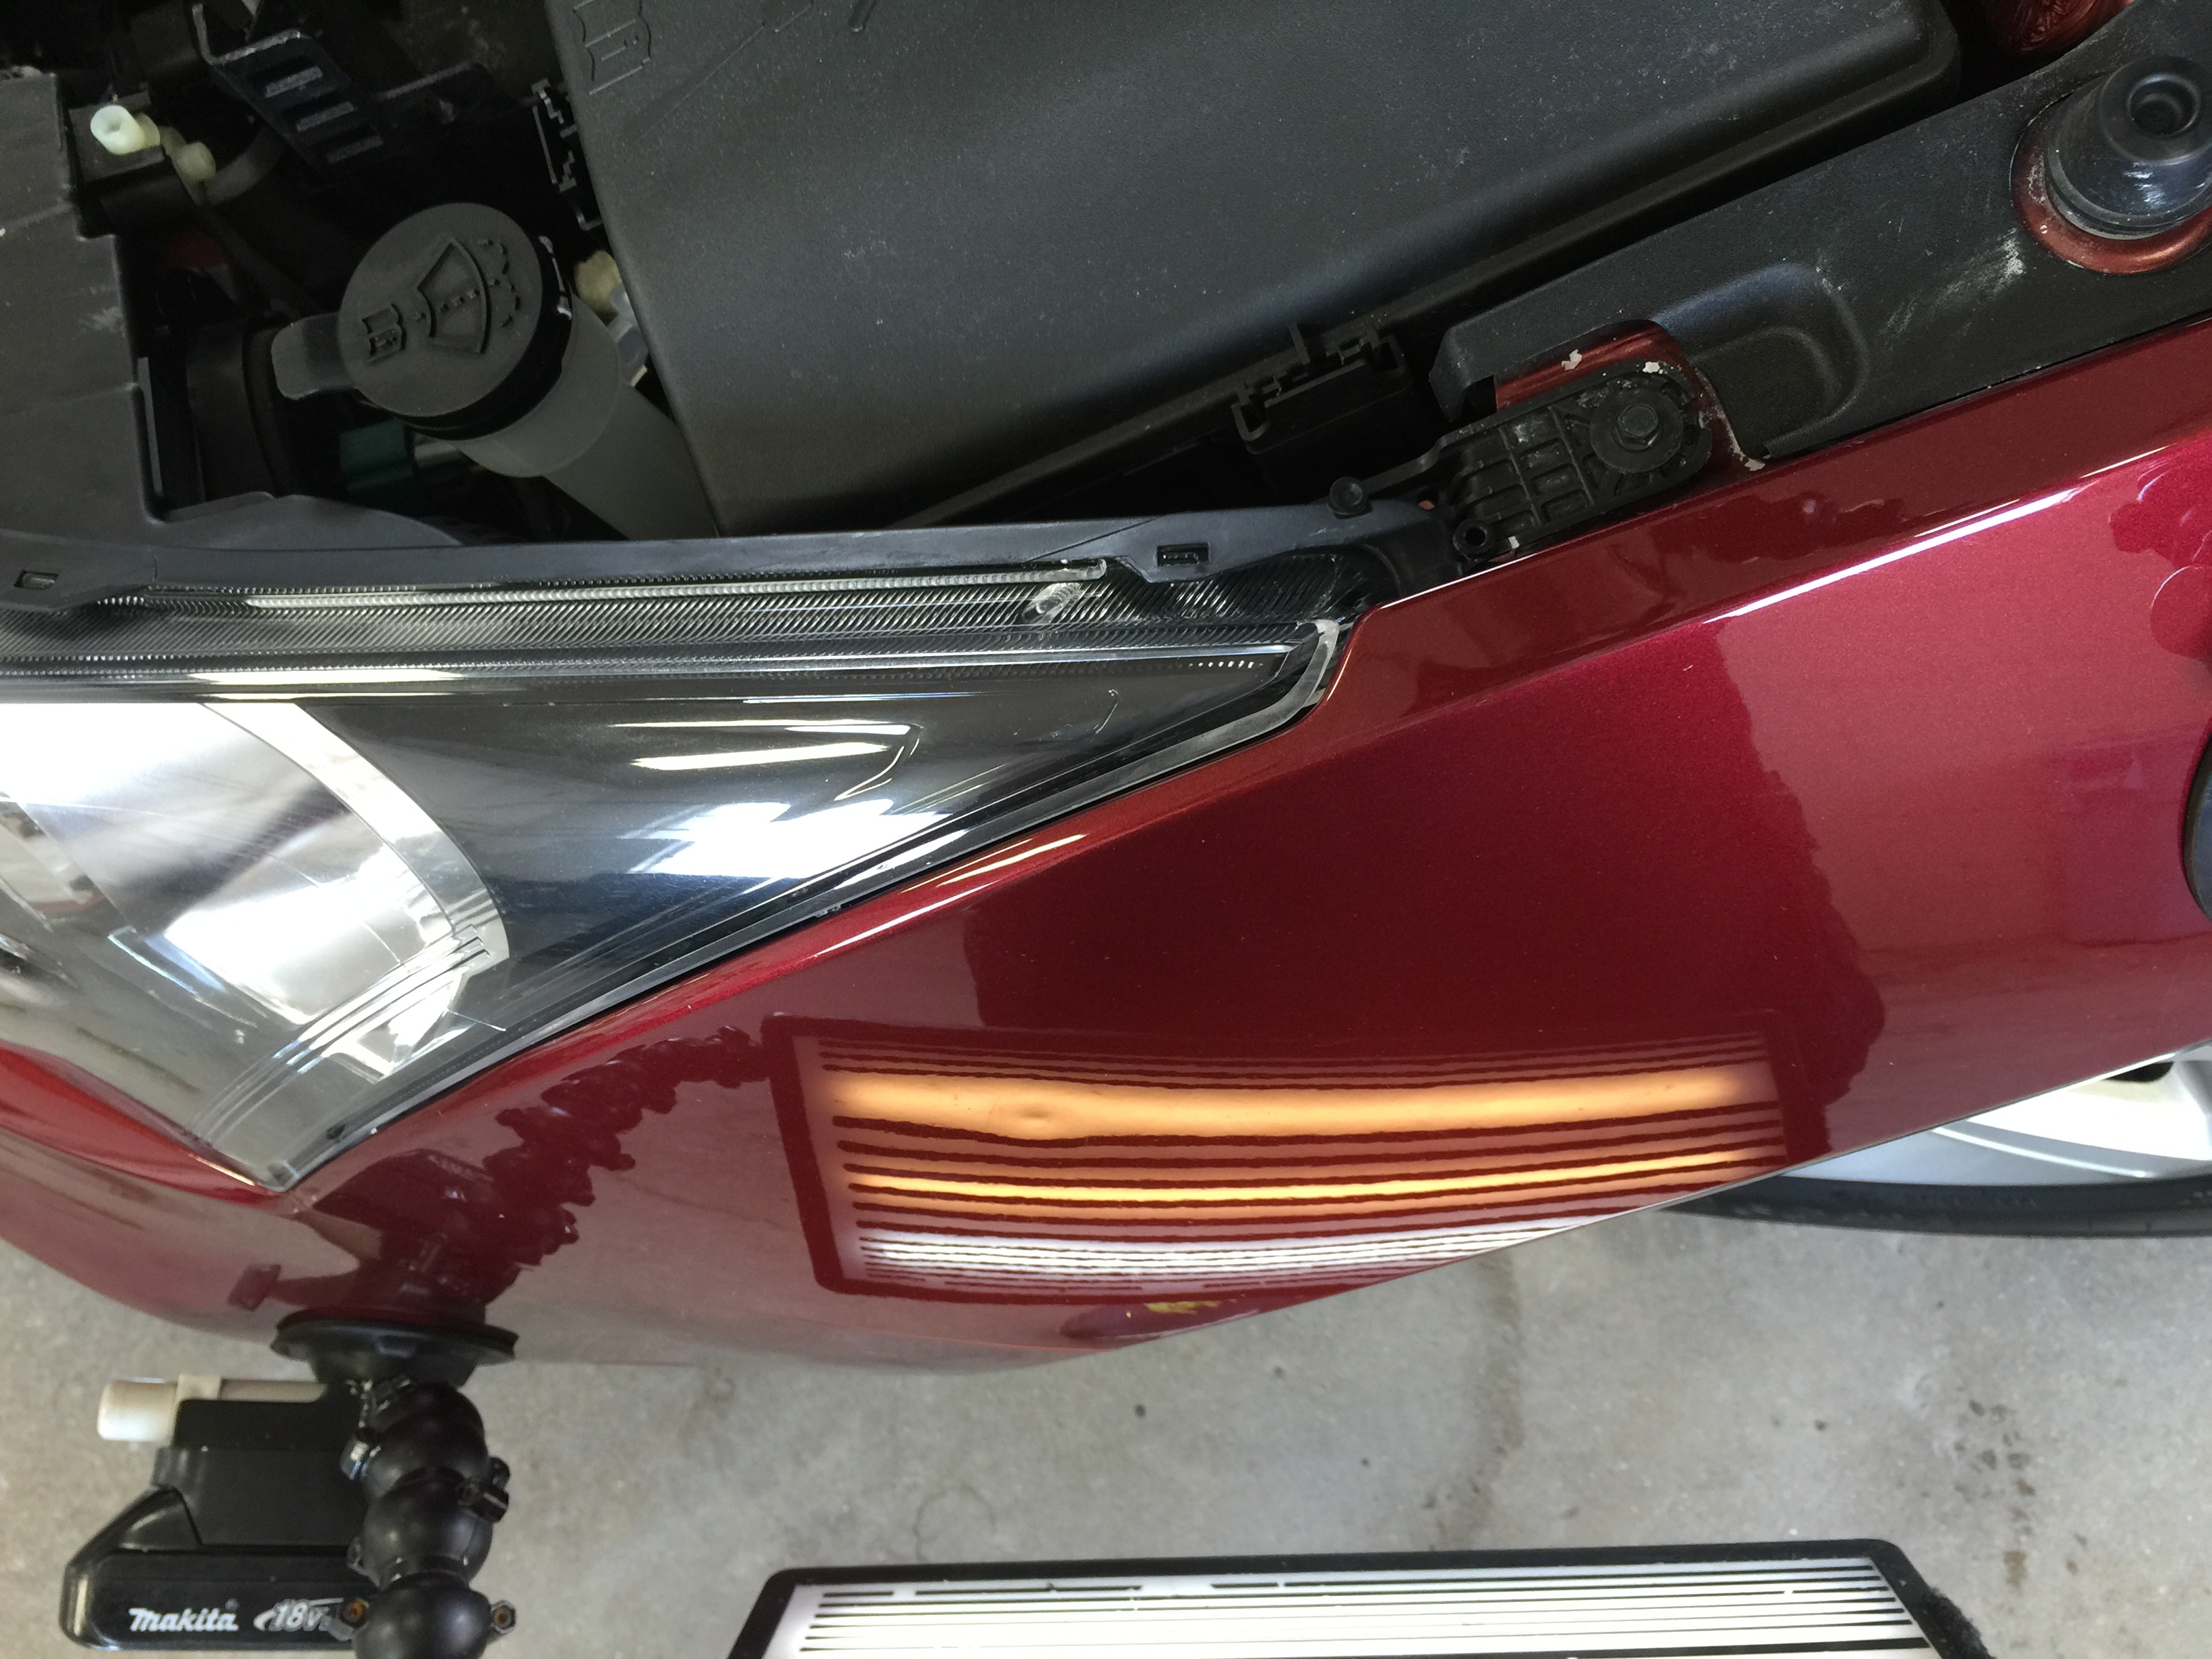 2015 Chevy Cruze Dent Removal on Drivers Fender | Dent Repair | Springfield, IL. Http://217dent.com